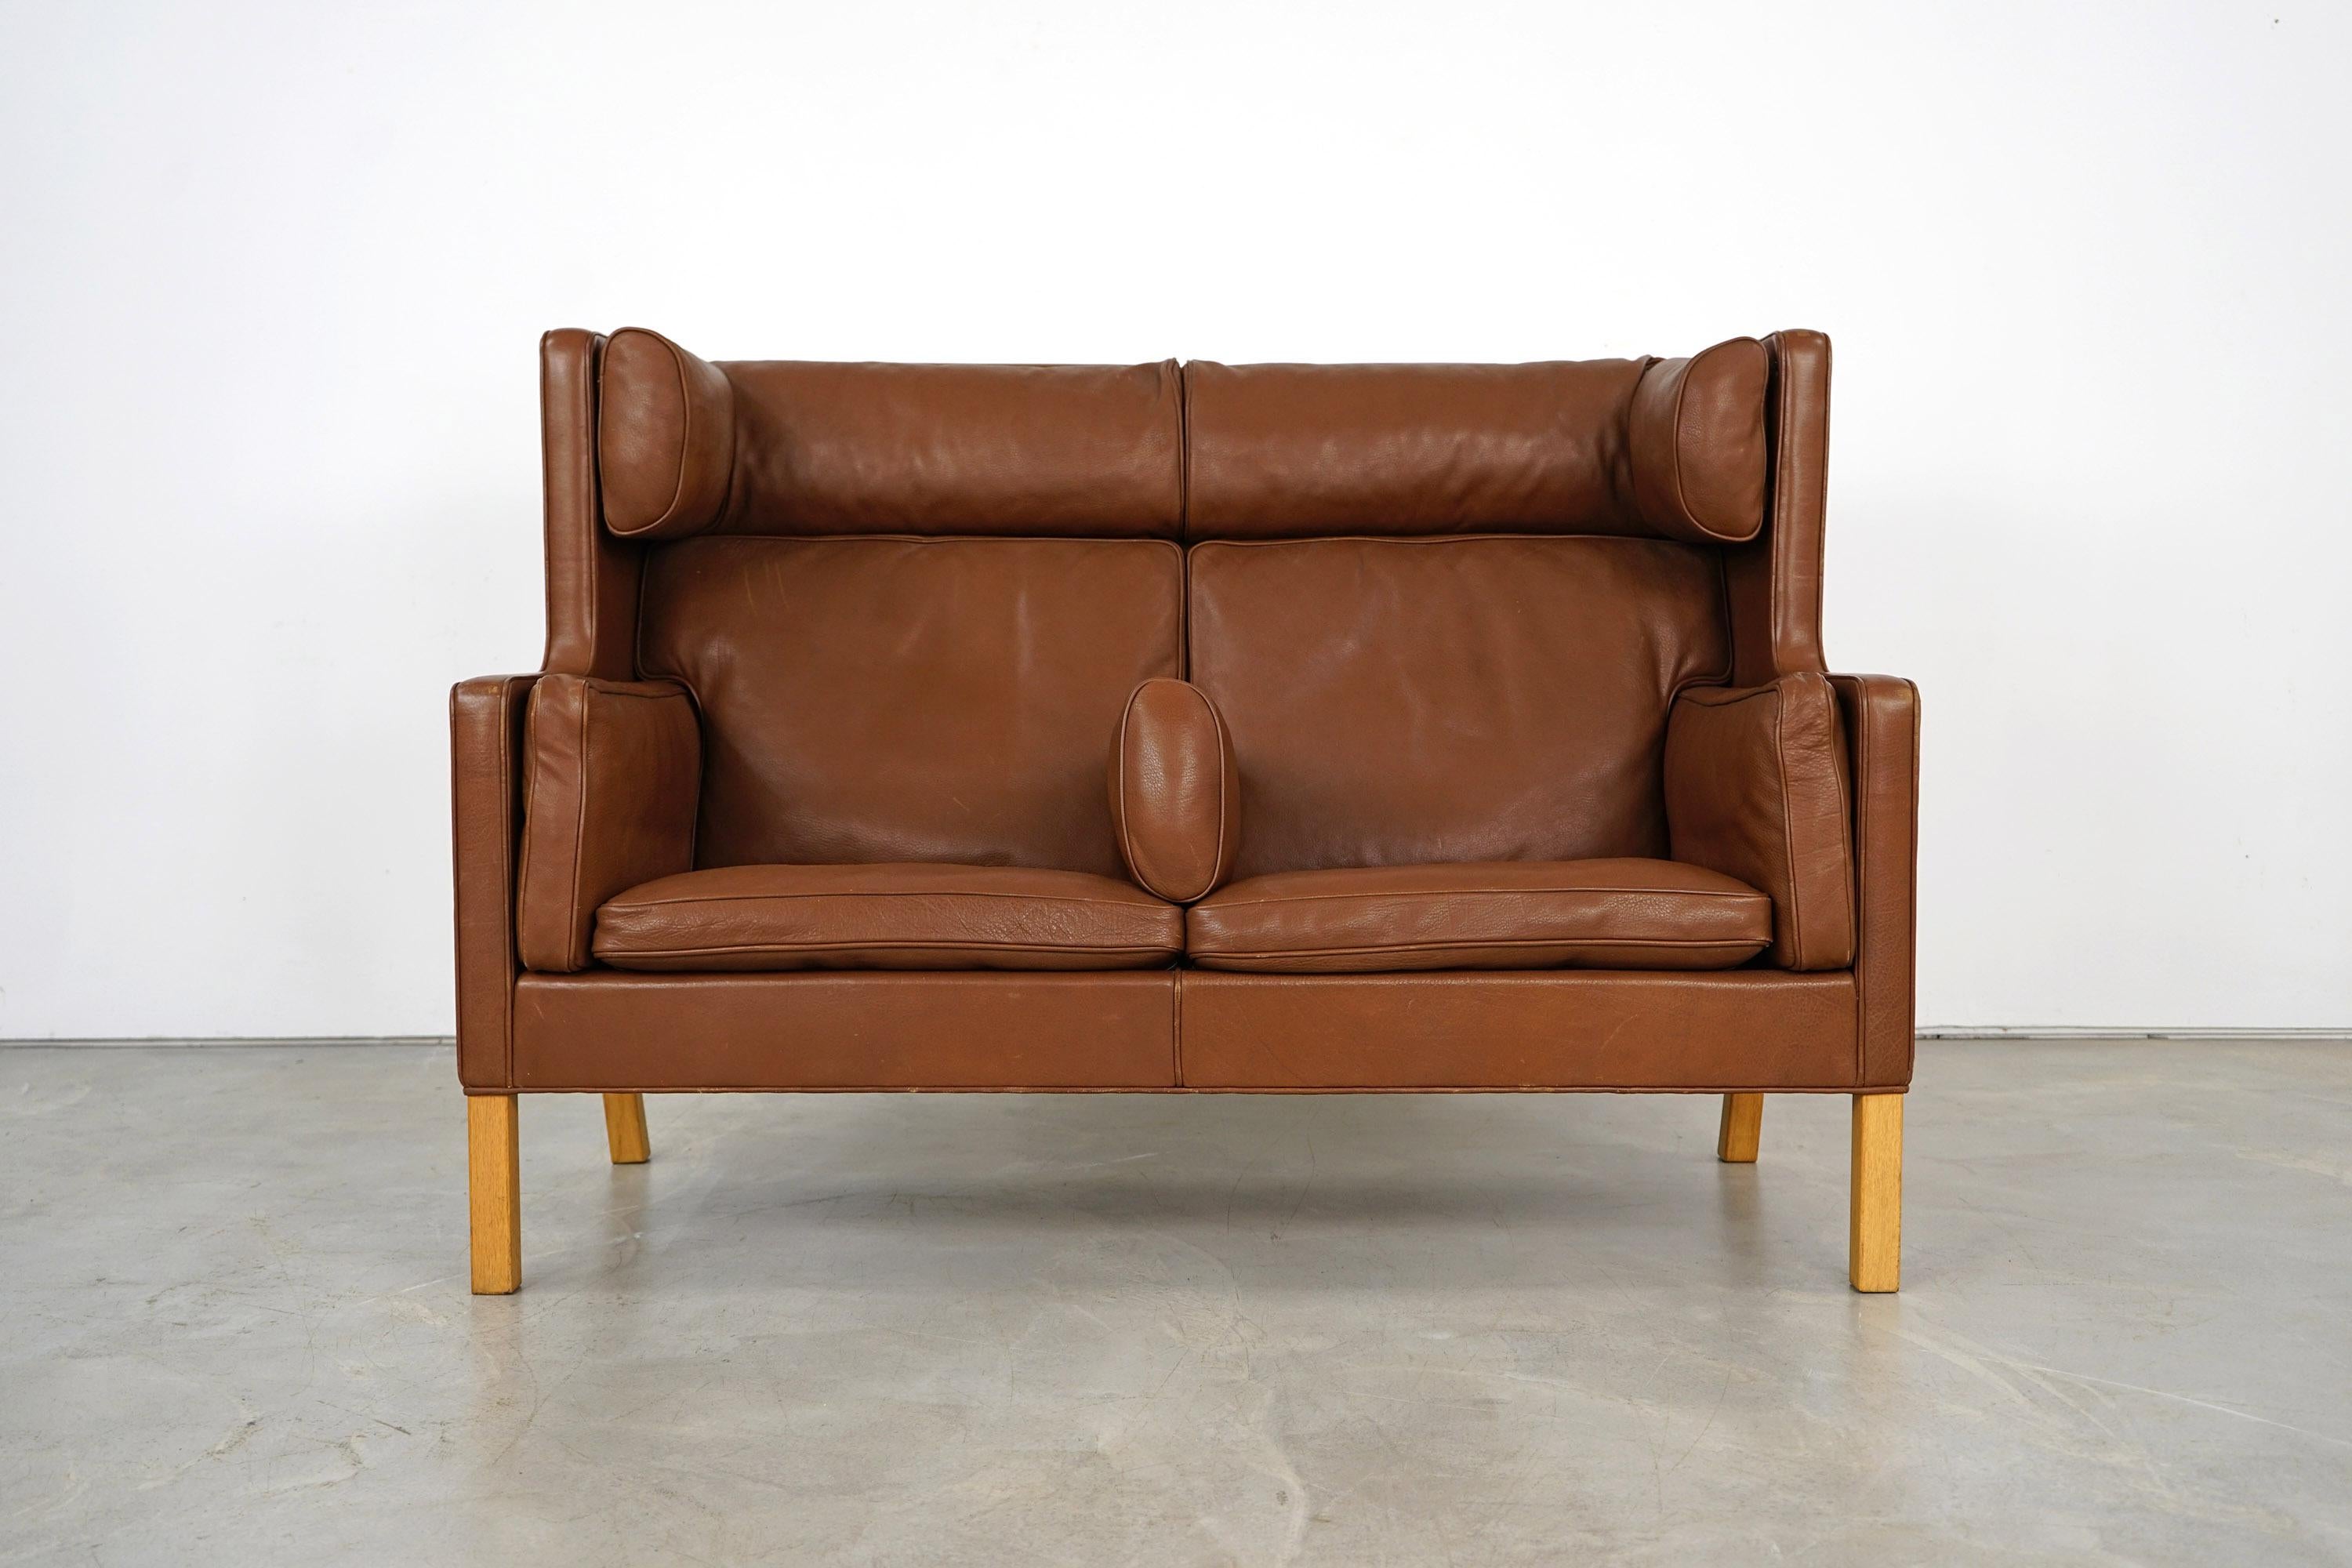 Børge Mogensen's Coupe 2-seat sofa was produced by the manufacturer Fredericia in Denmark. The piece is from the 1970s. The high-backed piece of furniture stands on legs made of light wood. The brown leather is in a very good vintage condition and